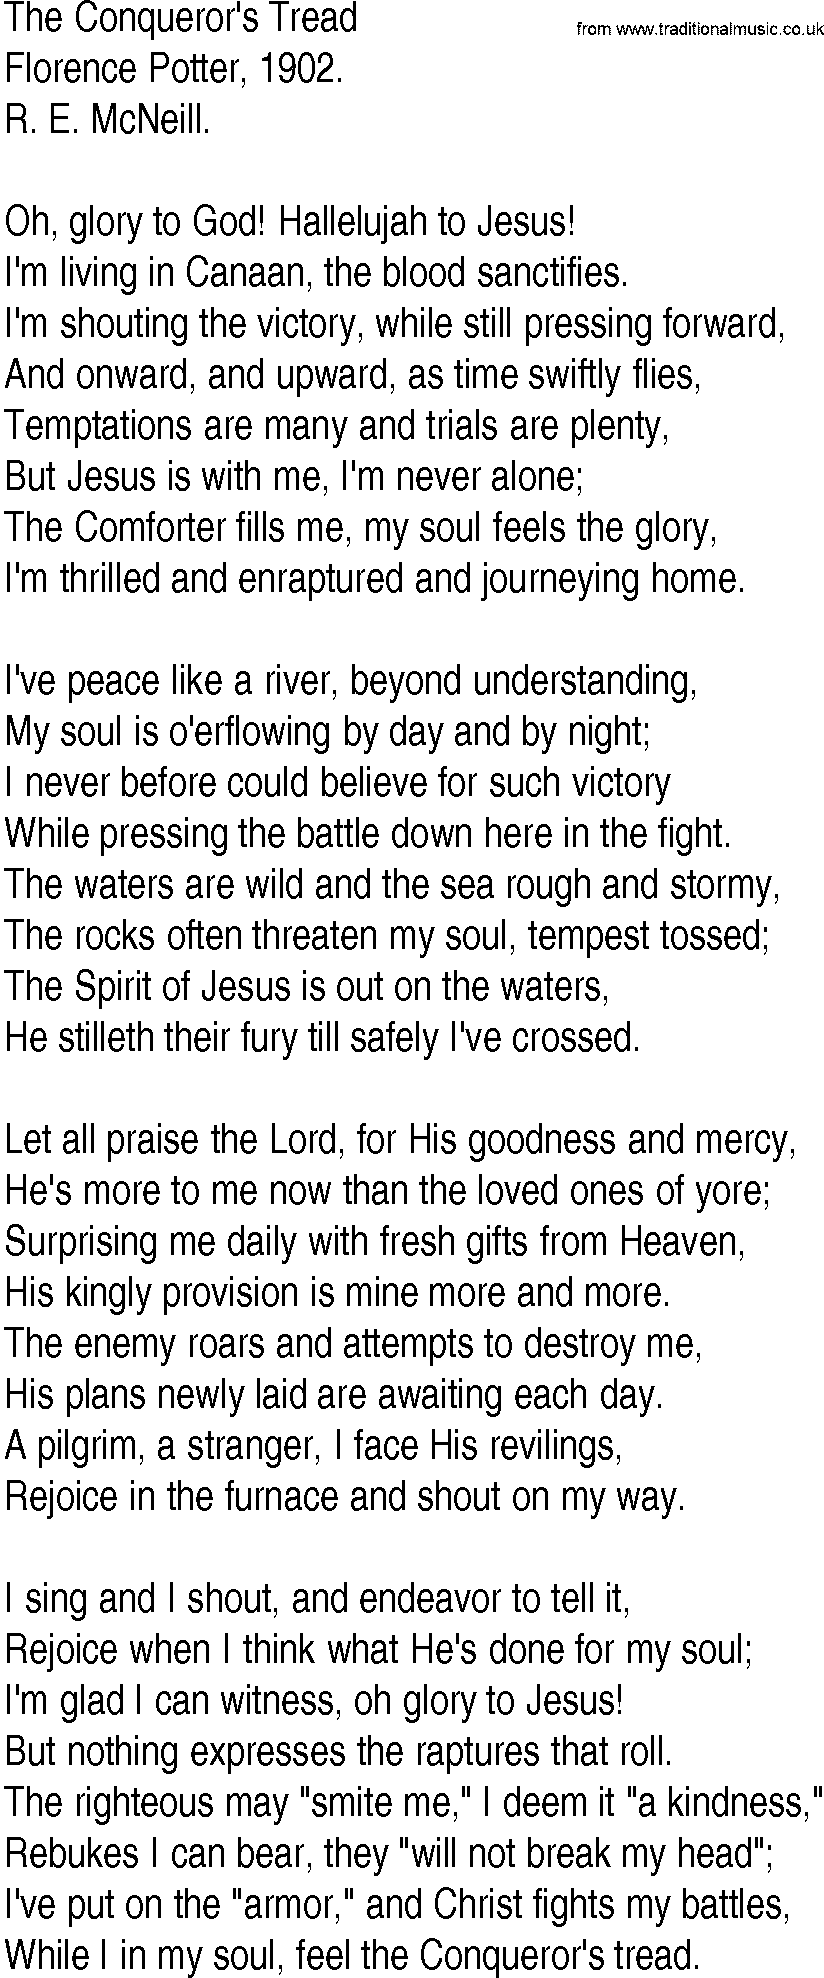 Hymn and Gospel Song: The Conqueror's Tread by Florence Potter lyrics